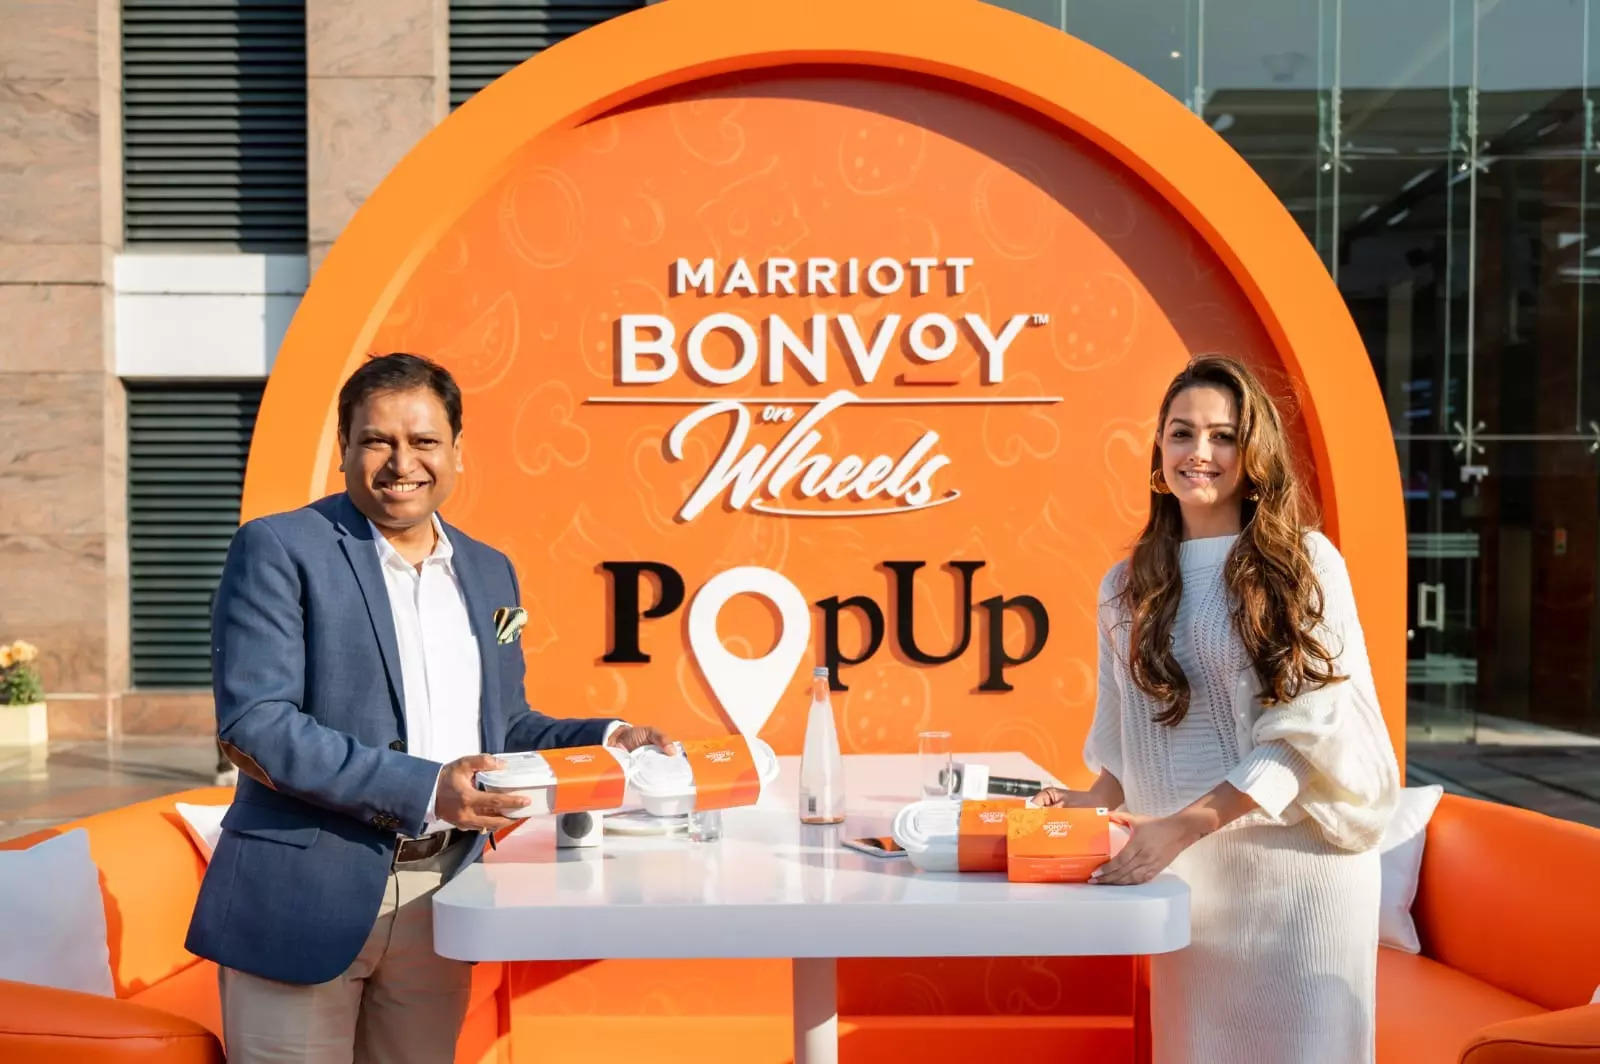 Marriott Bonvoy on Wheels will now deliver through the Club